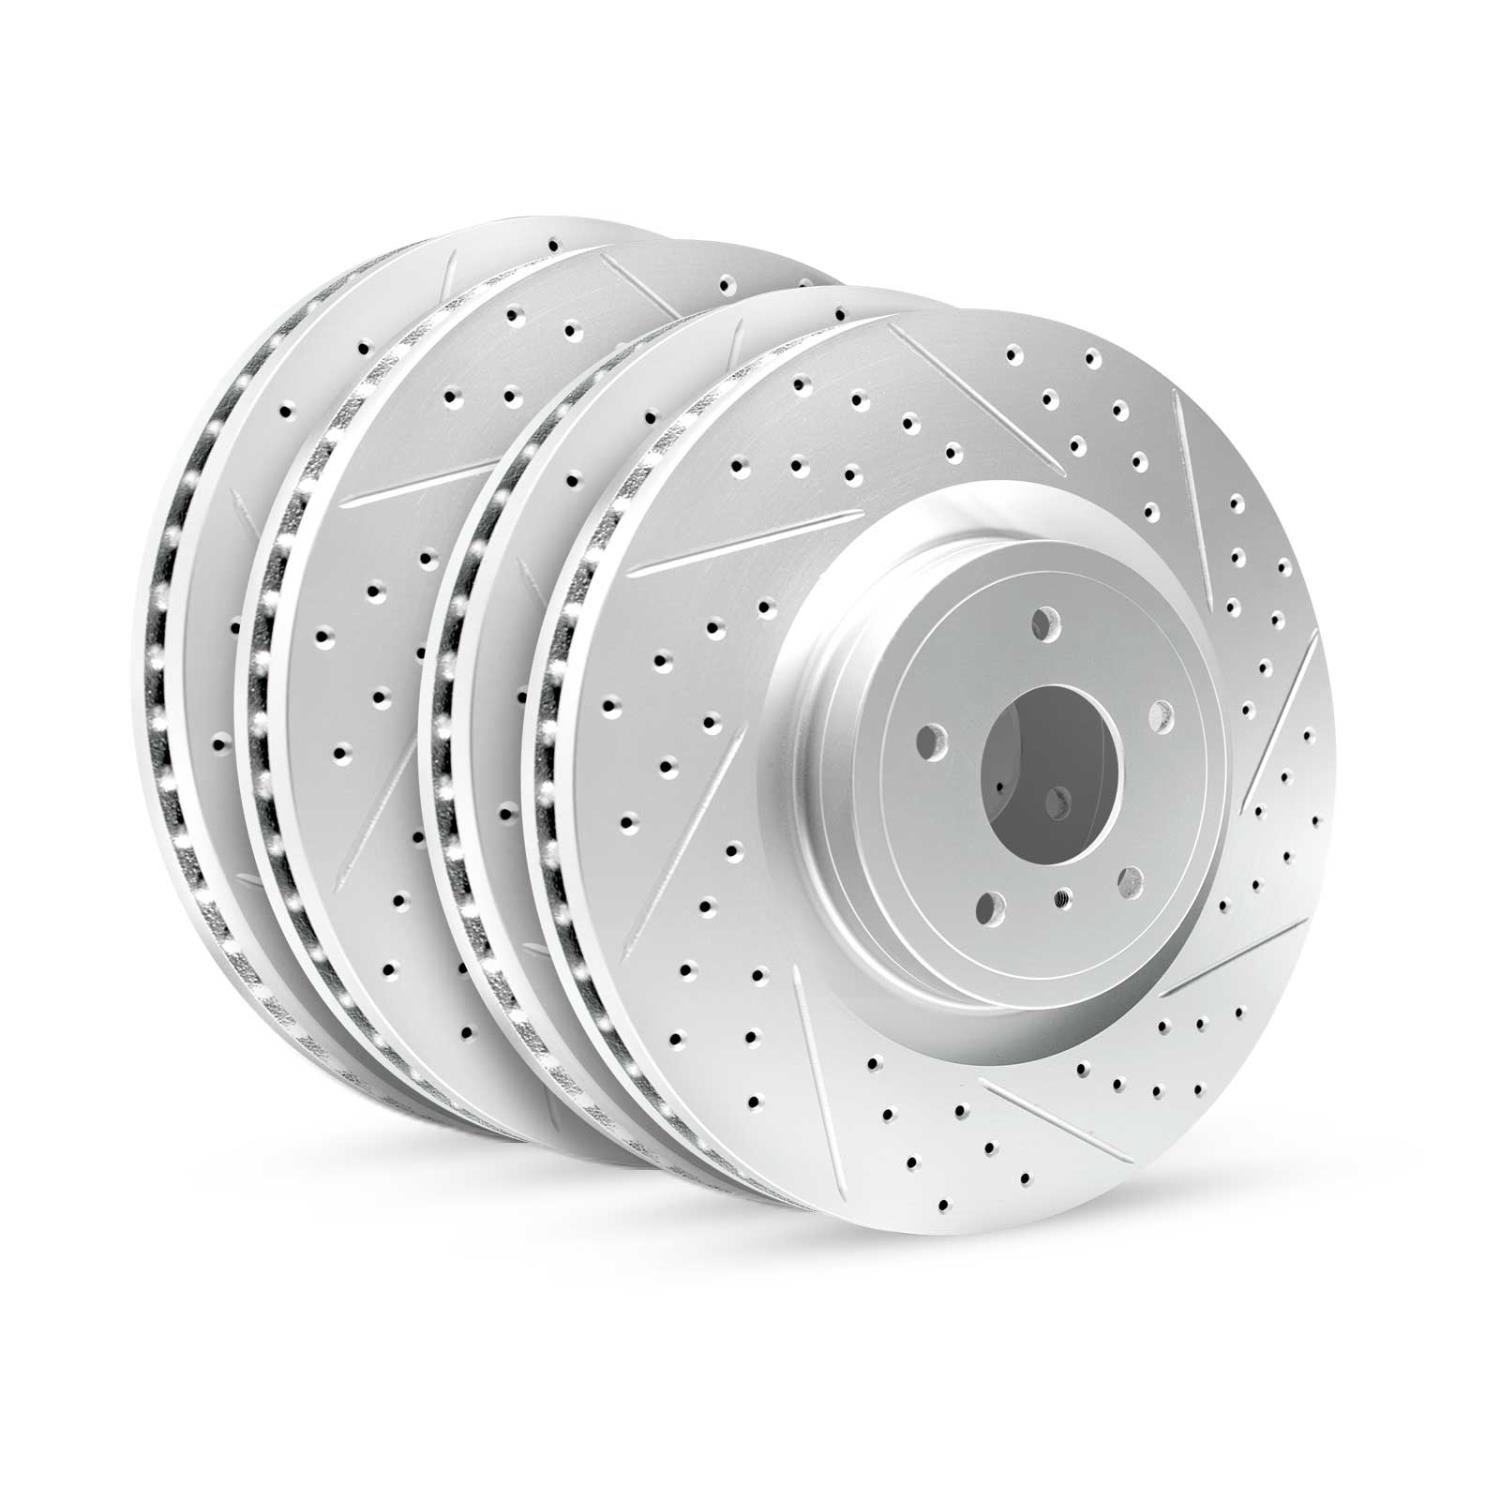 GEO-Carbon Drilled & Slotted Brake Rotor Set, Fits Select Mercedes-Benz, Position: Front & Rear